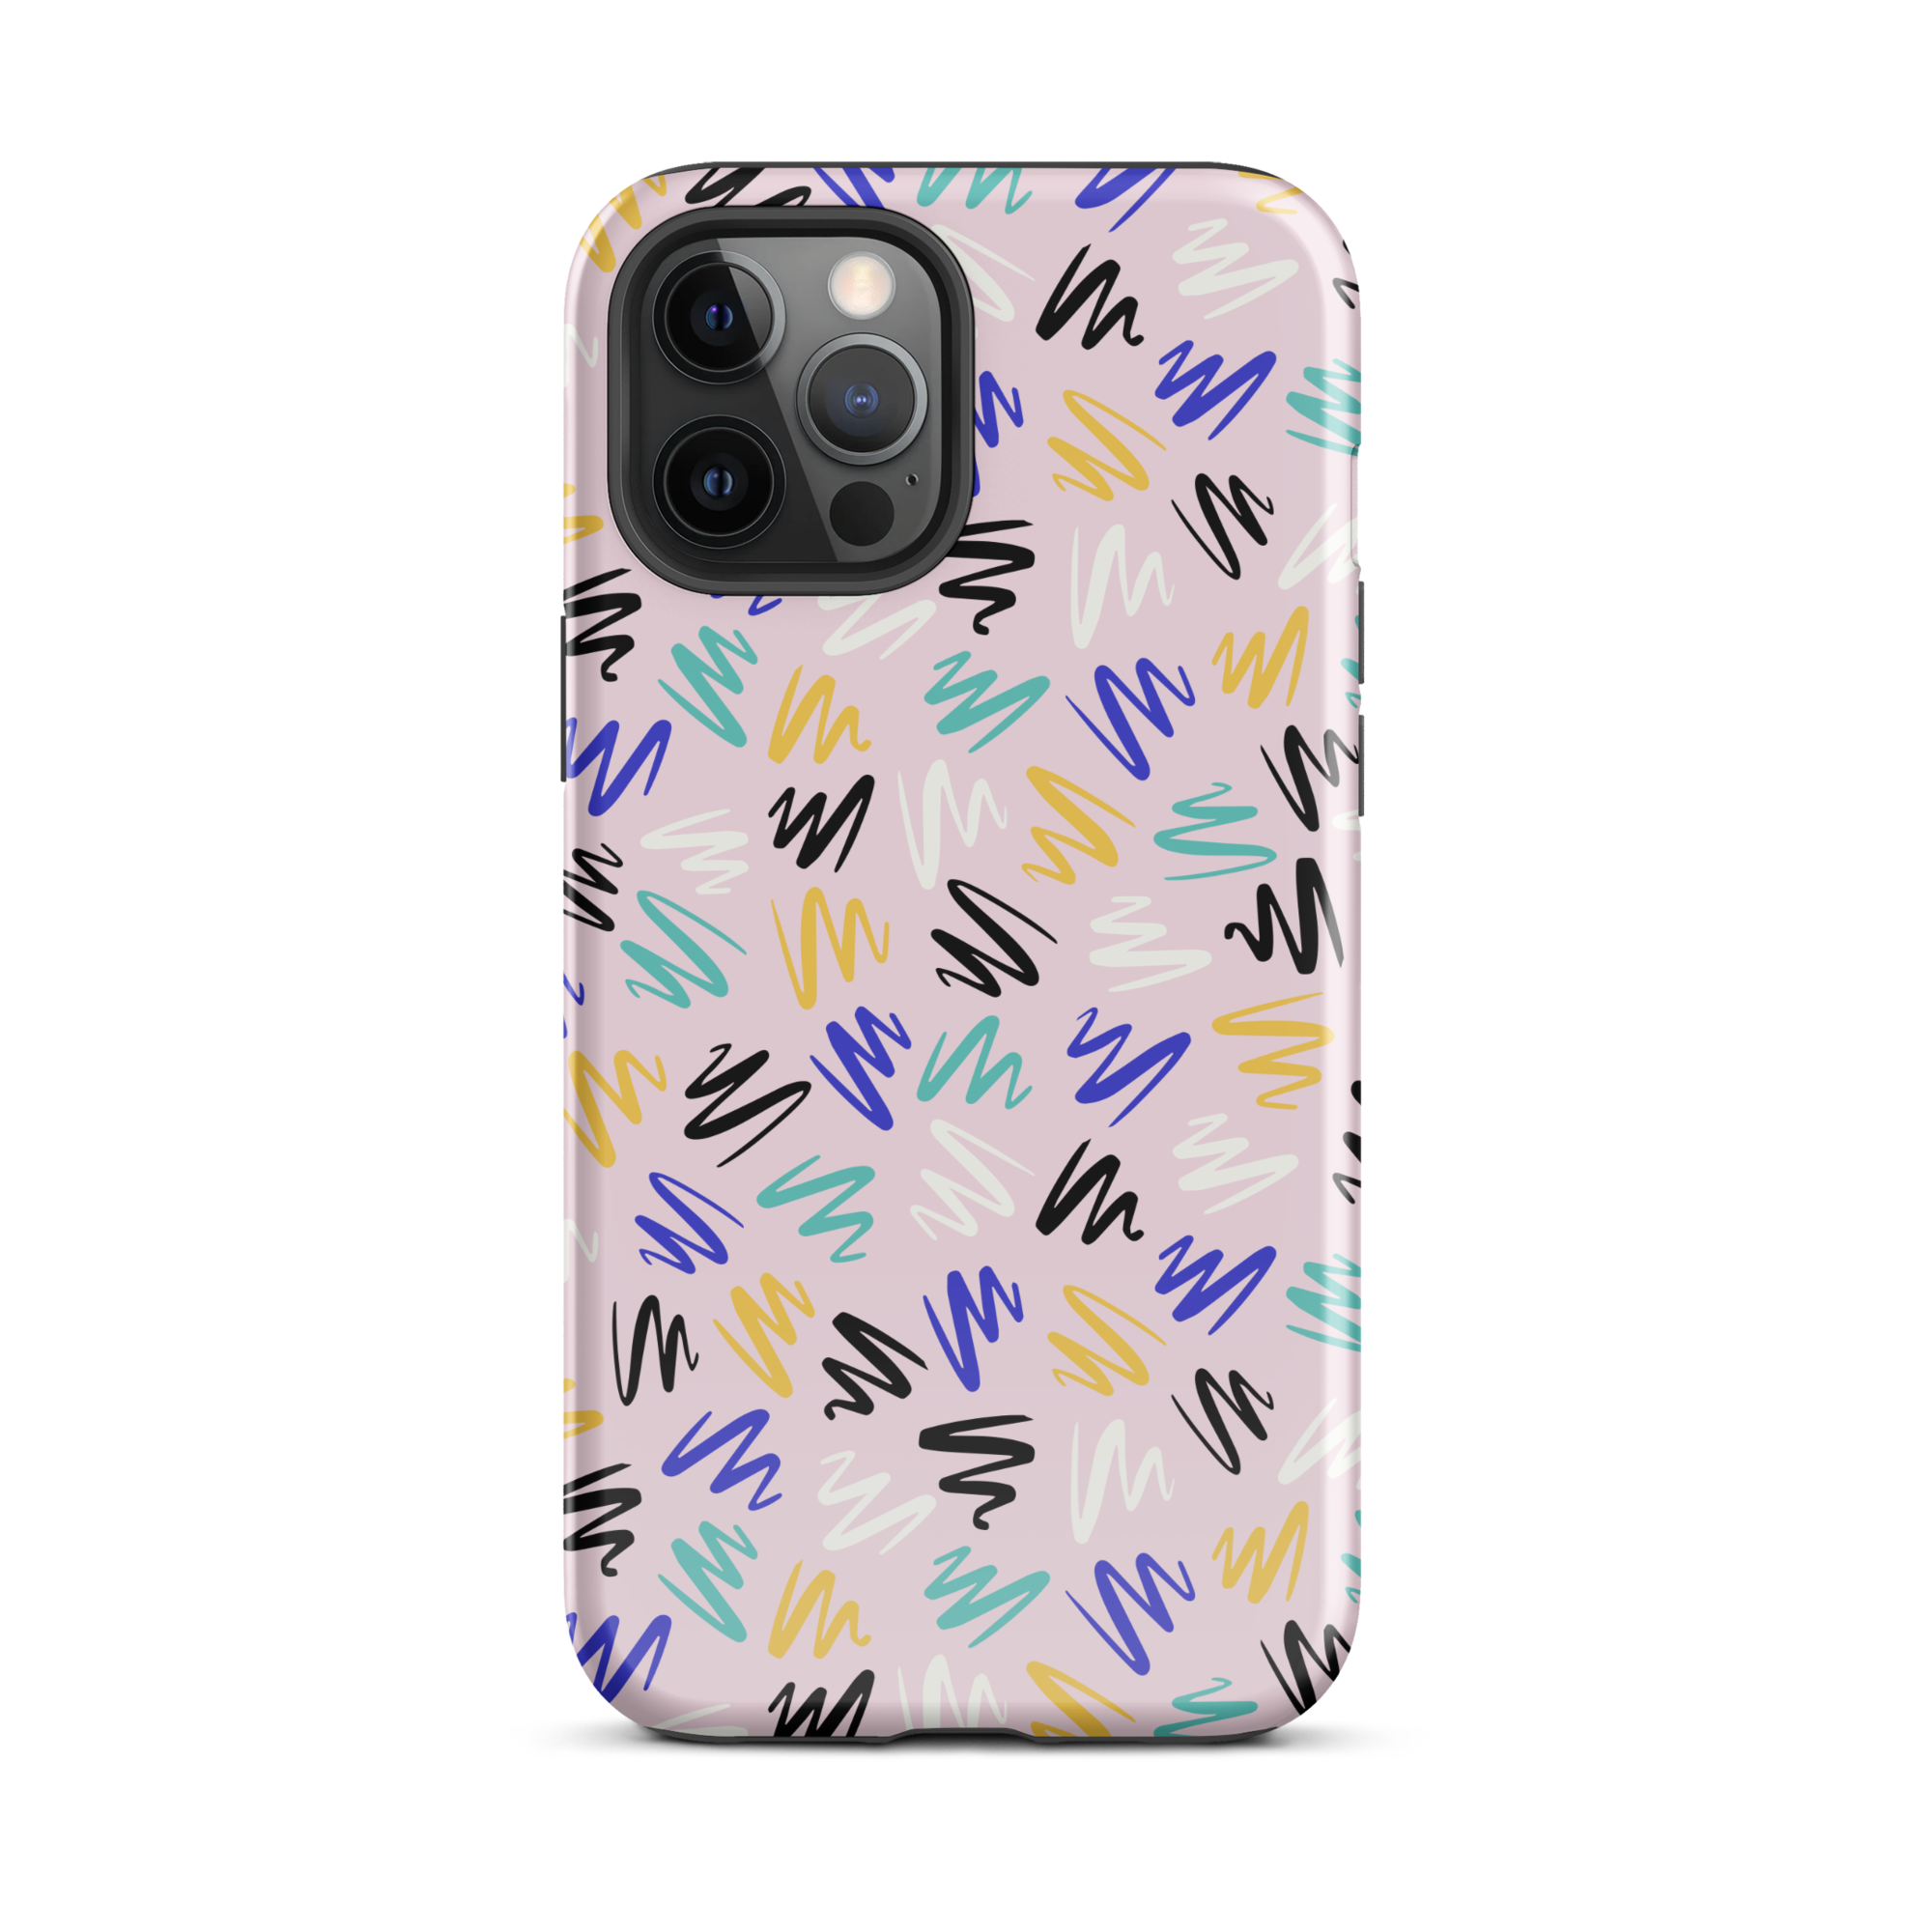 Scribbles iPhone 12 Pro Max Case